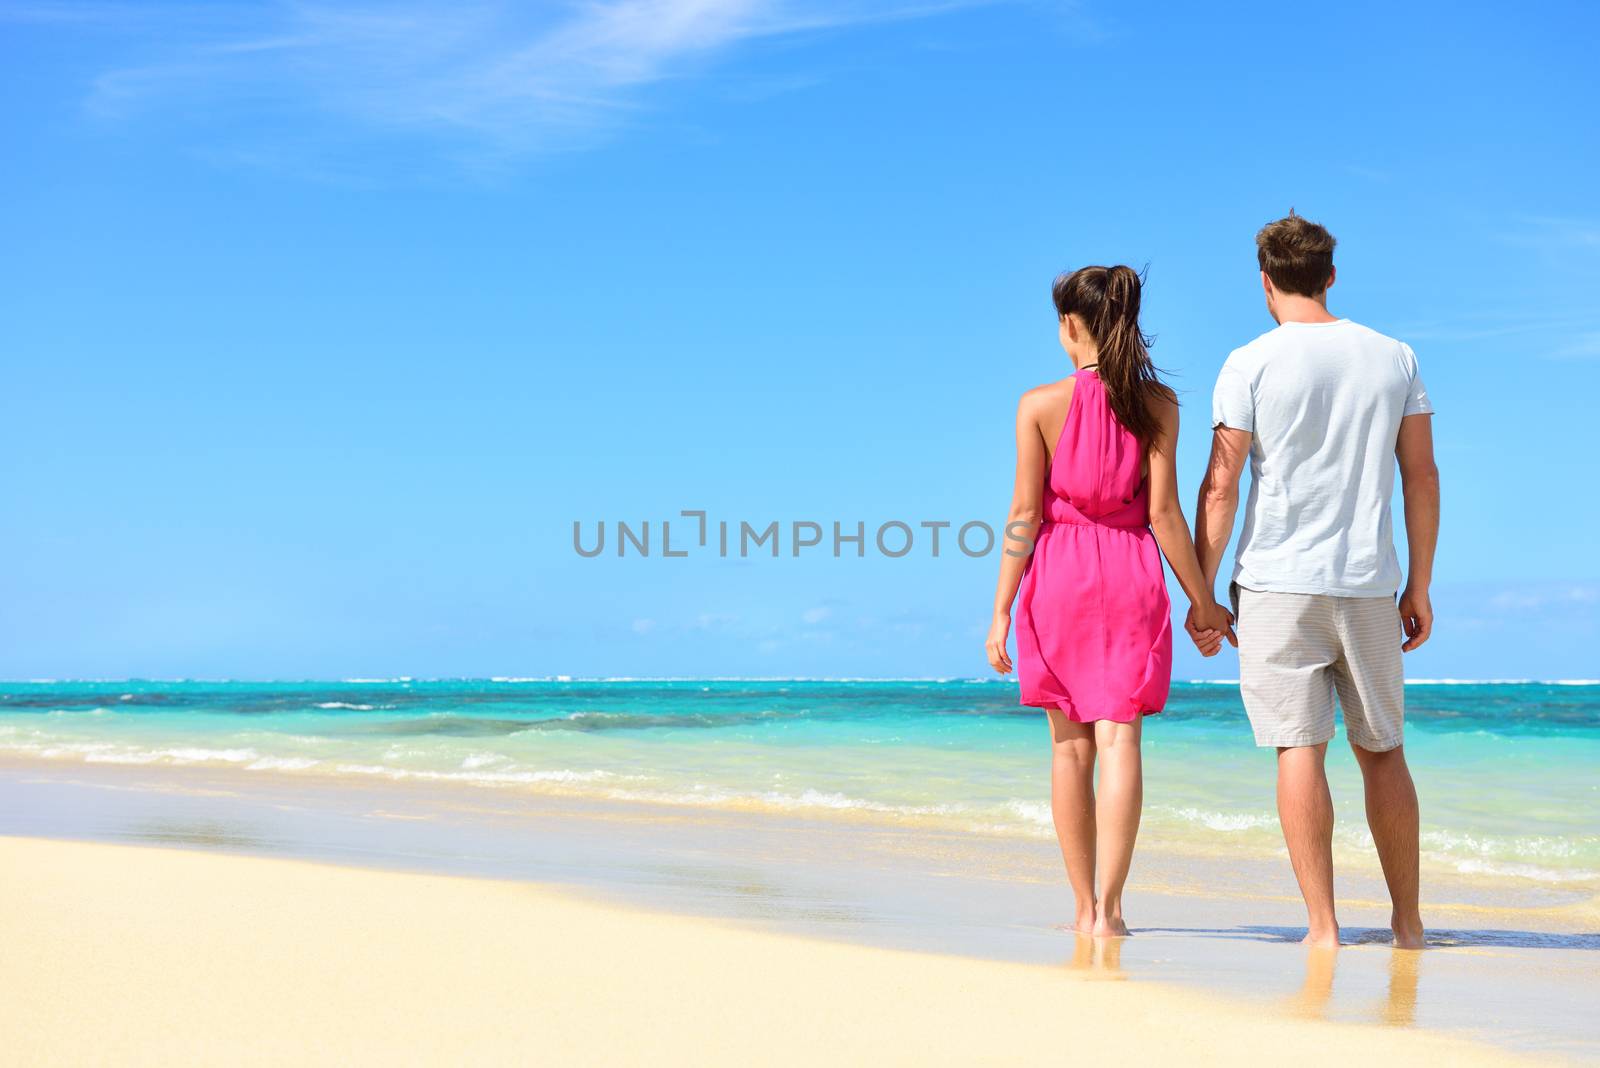 Summer holidays - couple on tropical beach vacation standing in white sand relaxing looking at ocean view. Romantic young adults holding hands in beachwear with pink dress and surf shorts in love.